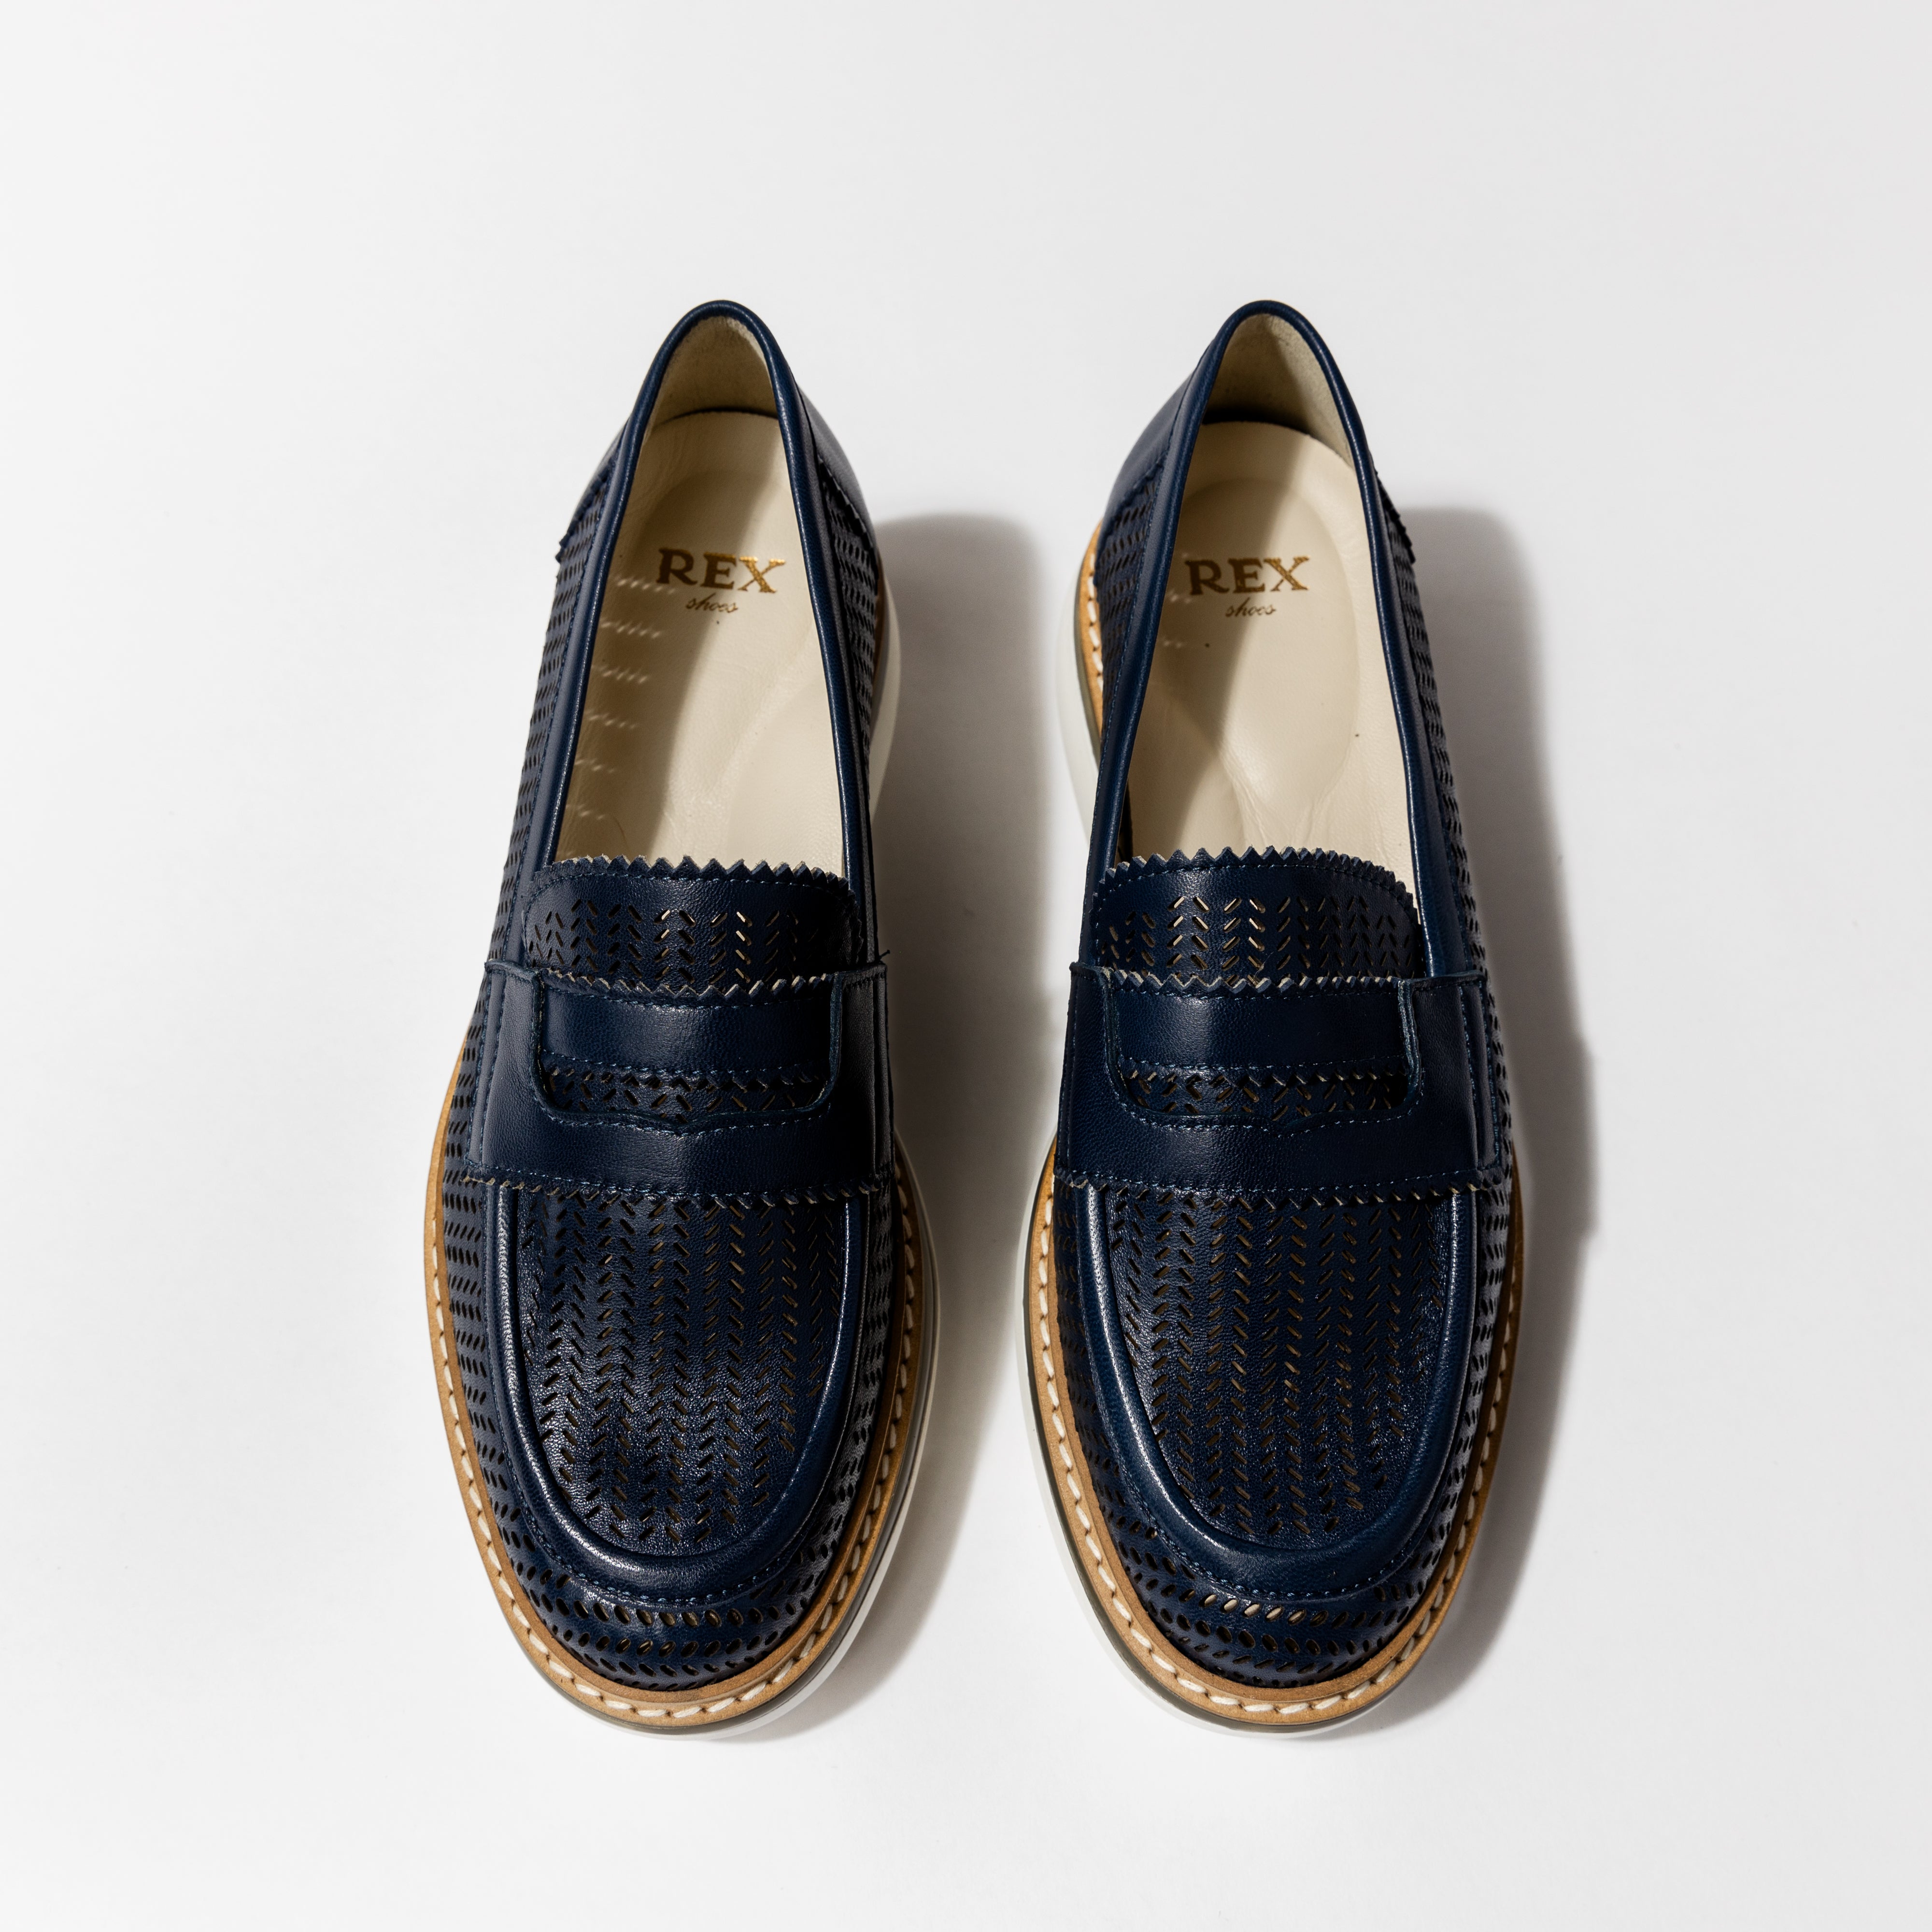 Top view of the &#39;Lauren&#39; luxury loafers in Nuit Leather, featuring sleek black perforated design and timeless strap detail, crafted by Rex Shoes.